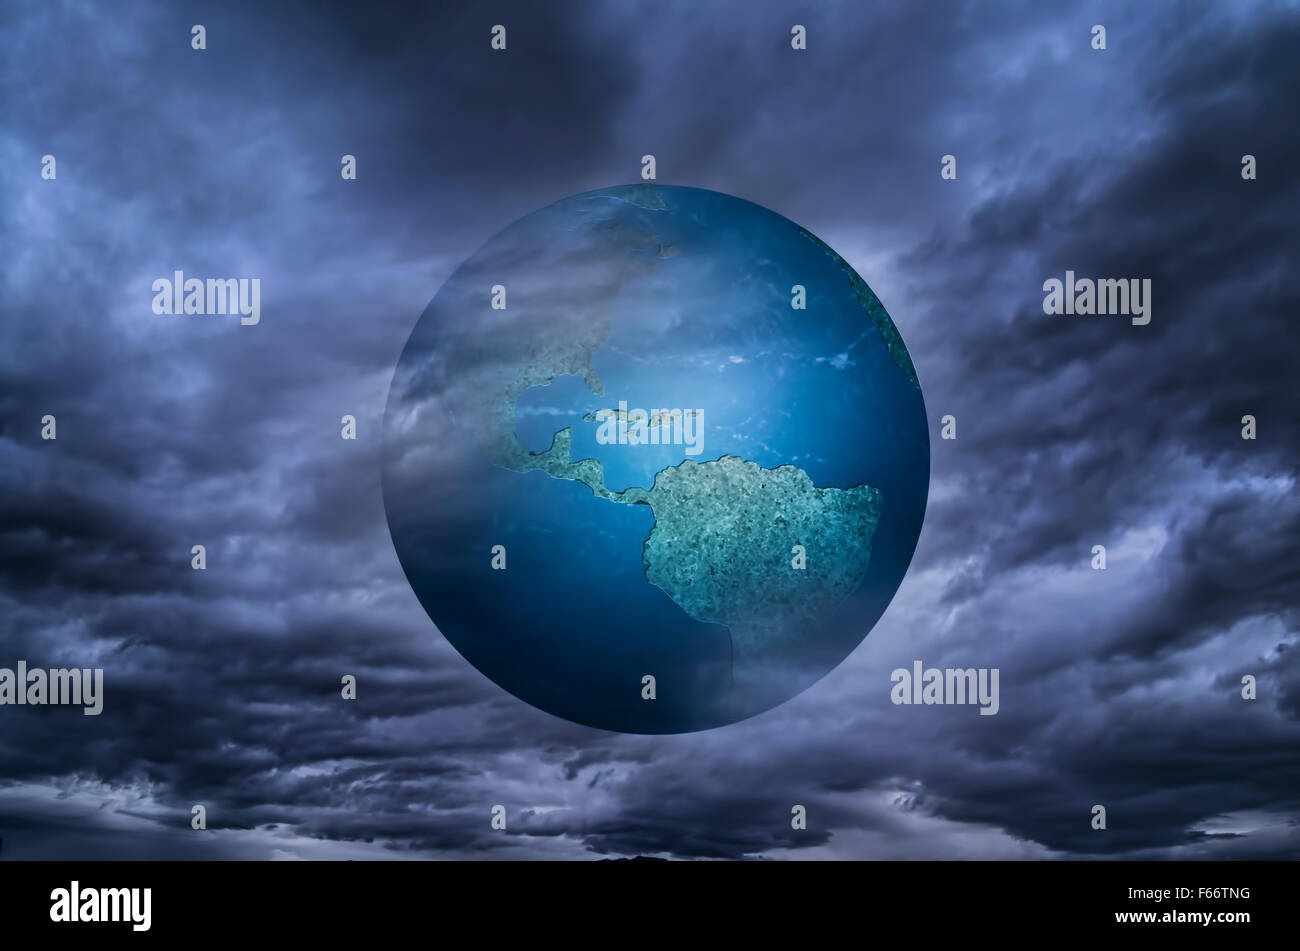 Image of earth planet with clouds Stock Photo